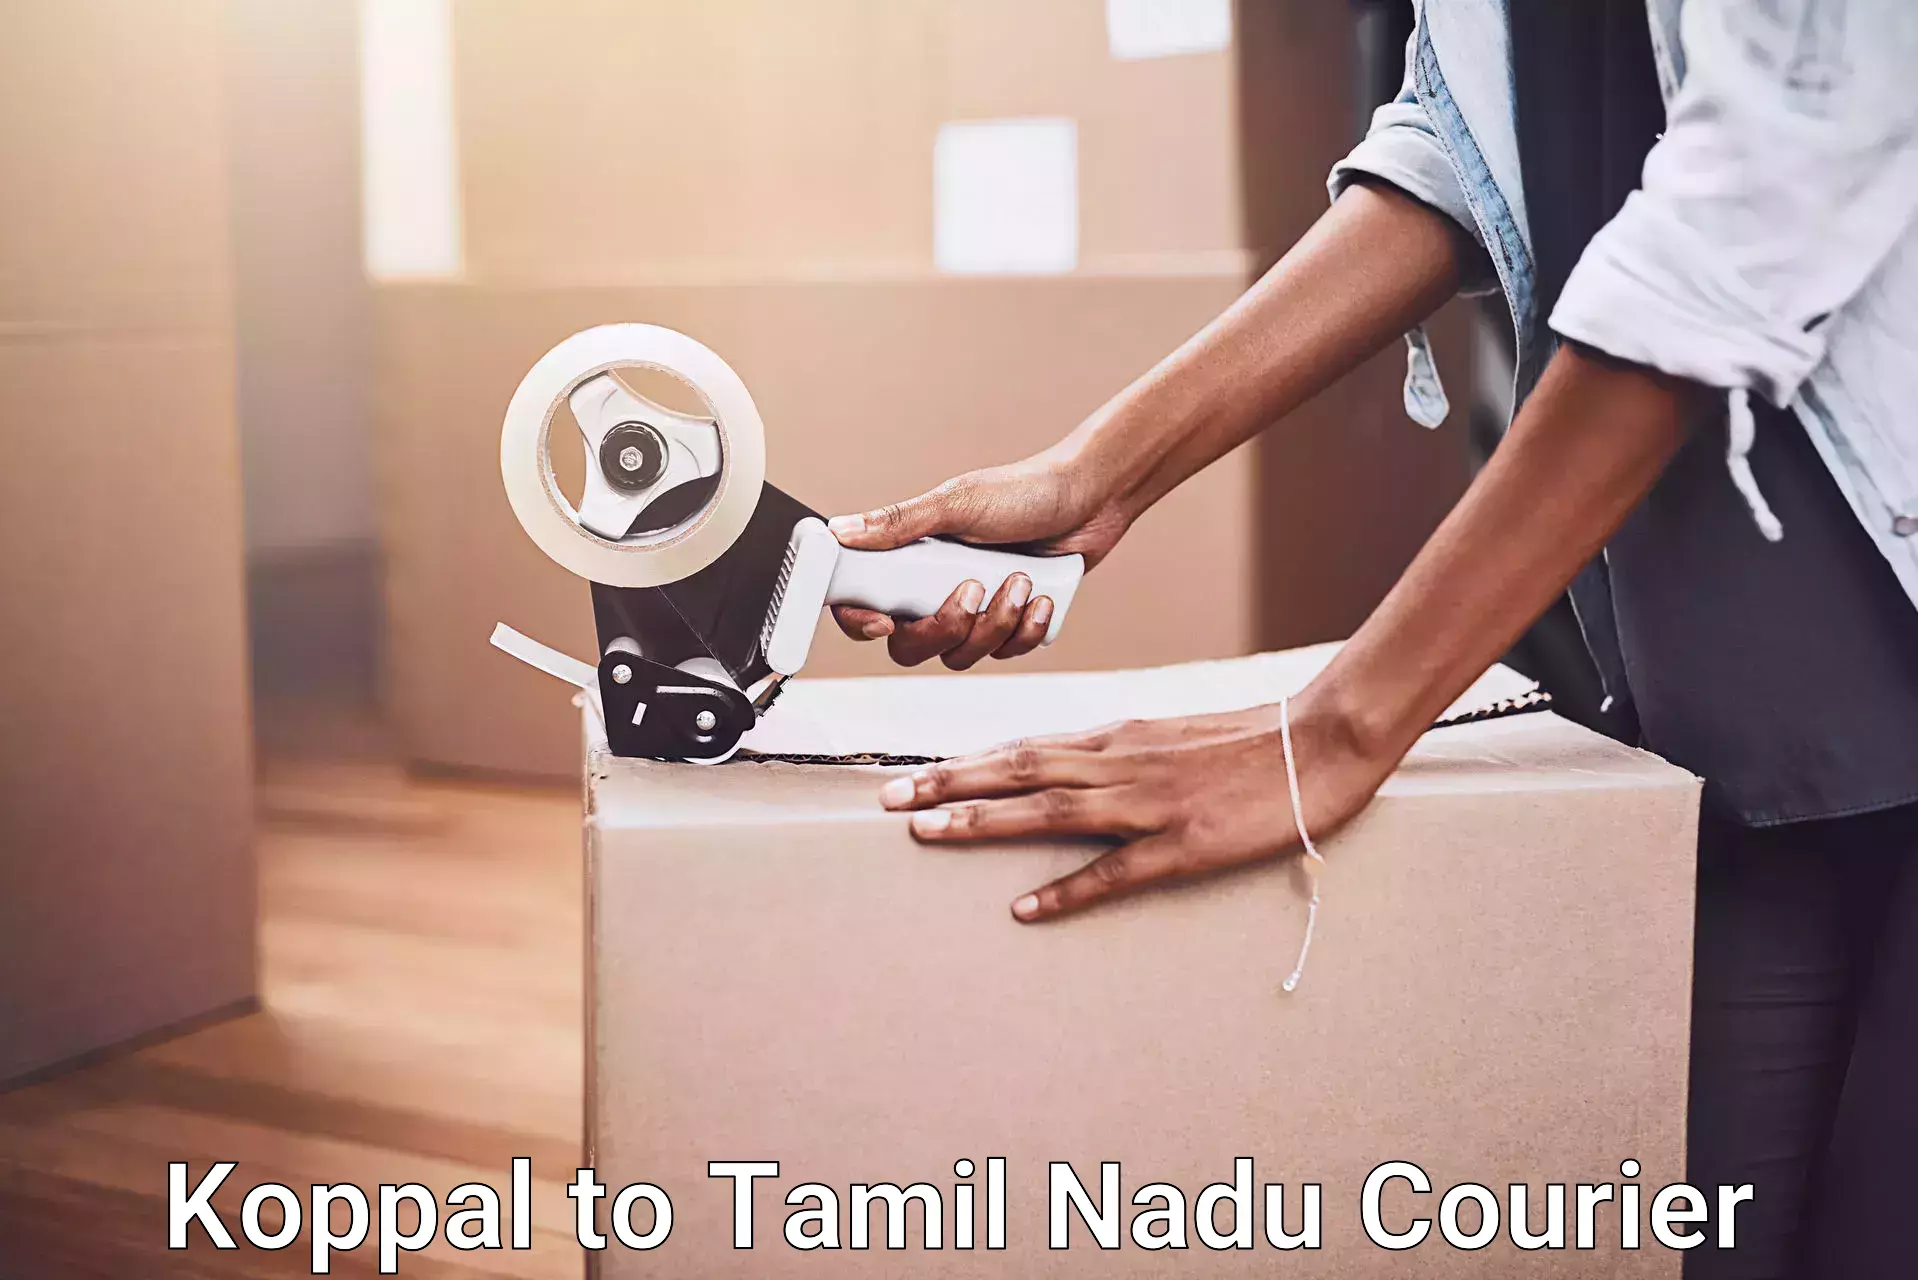 Home relocation experts Koppal to Tamil Nadu